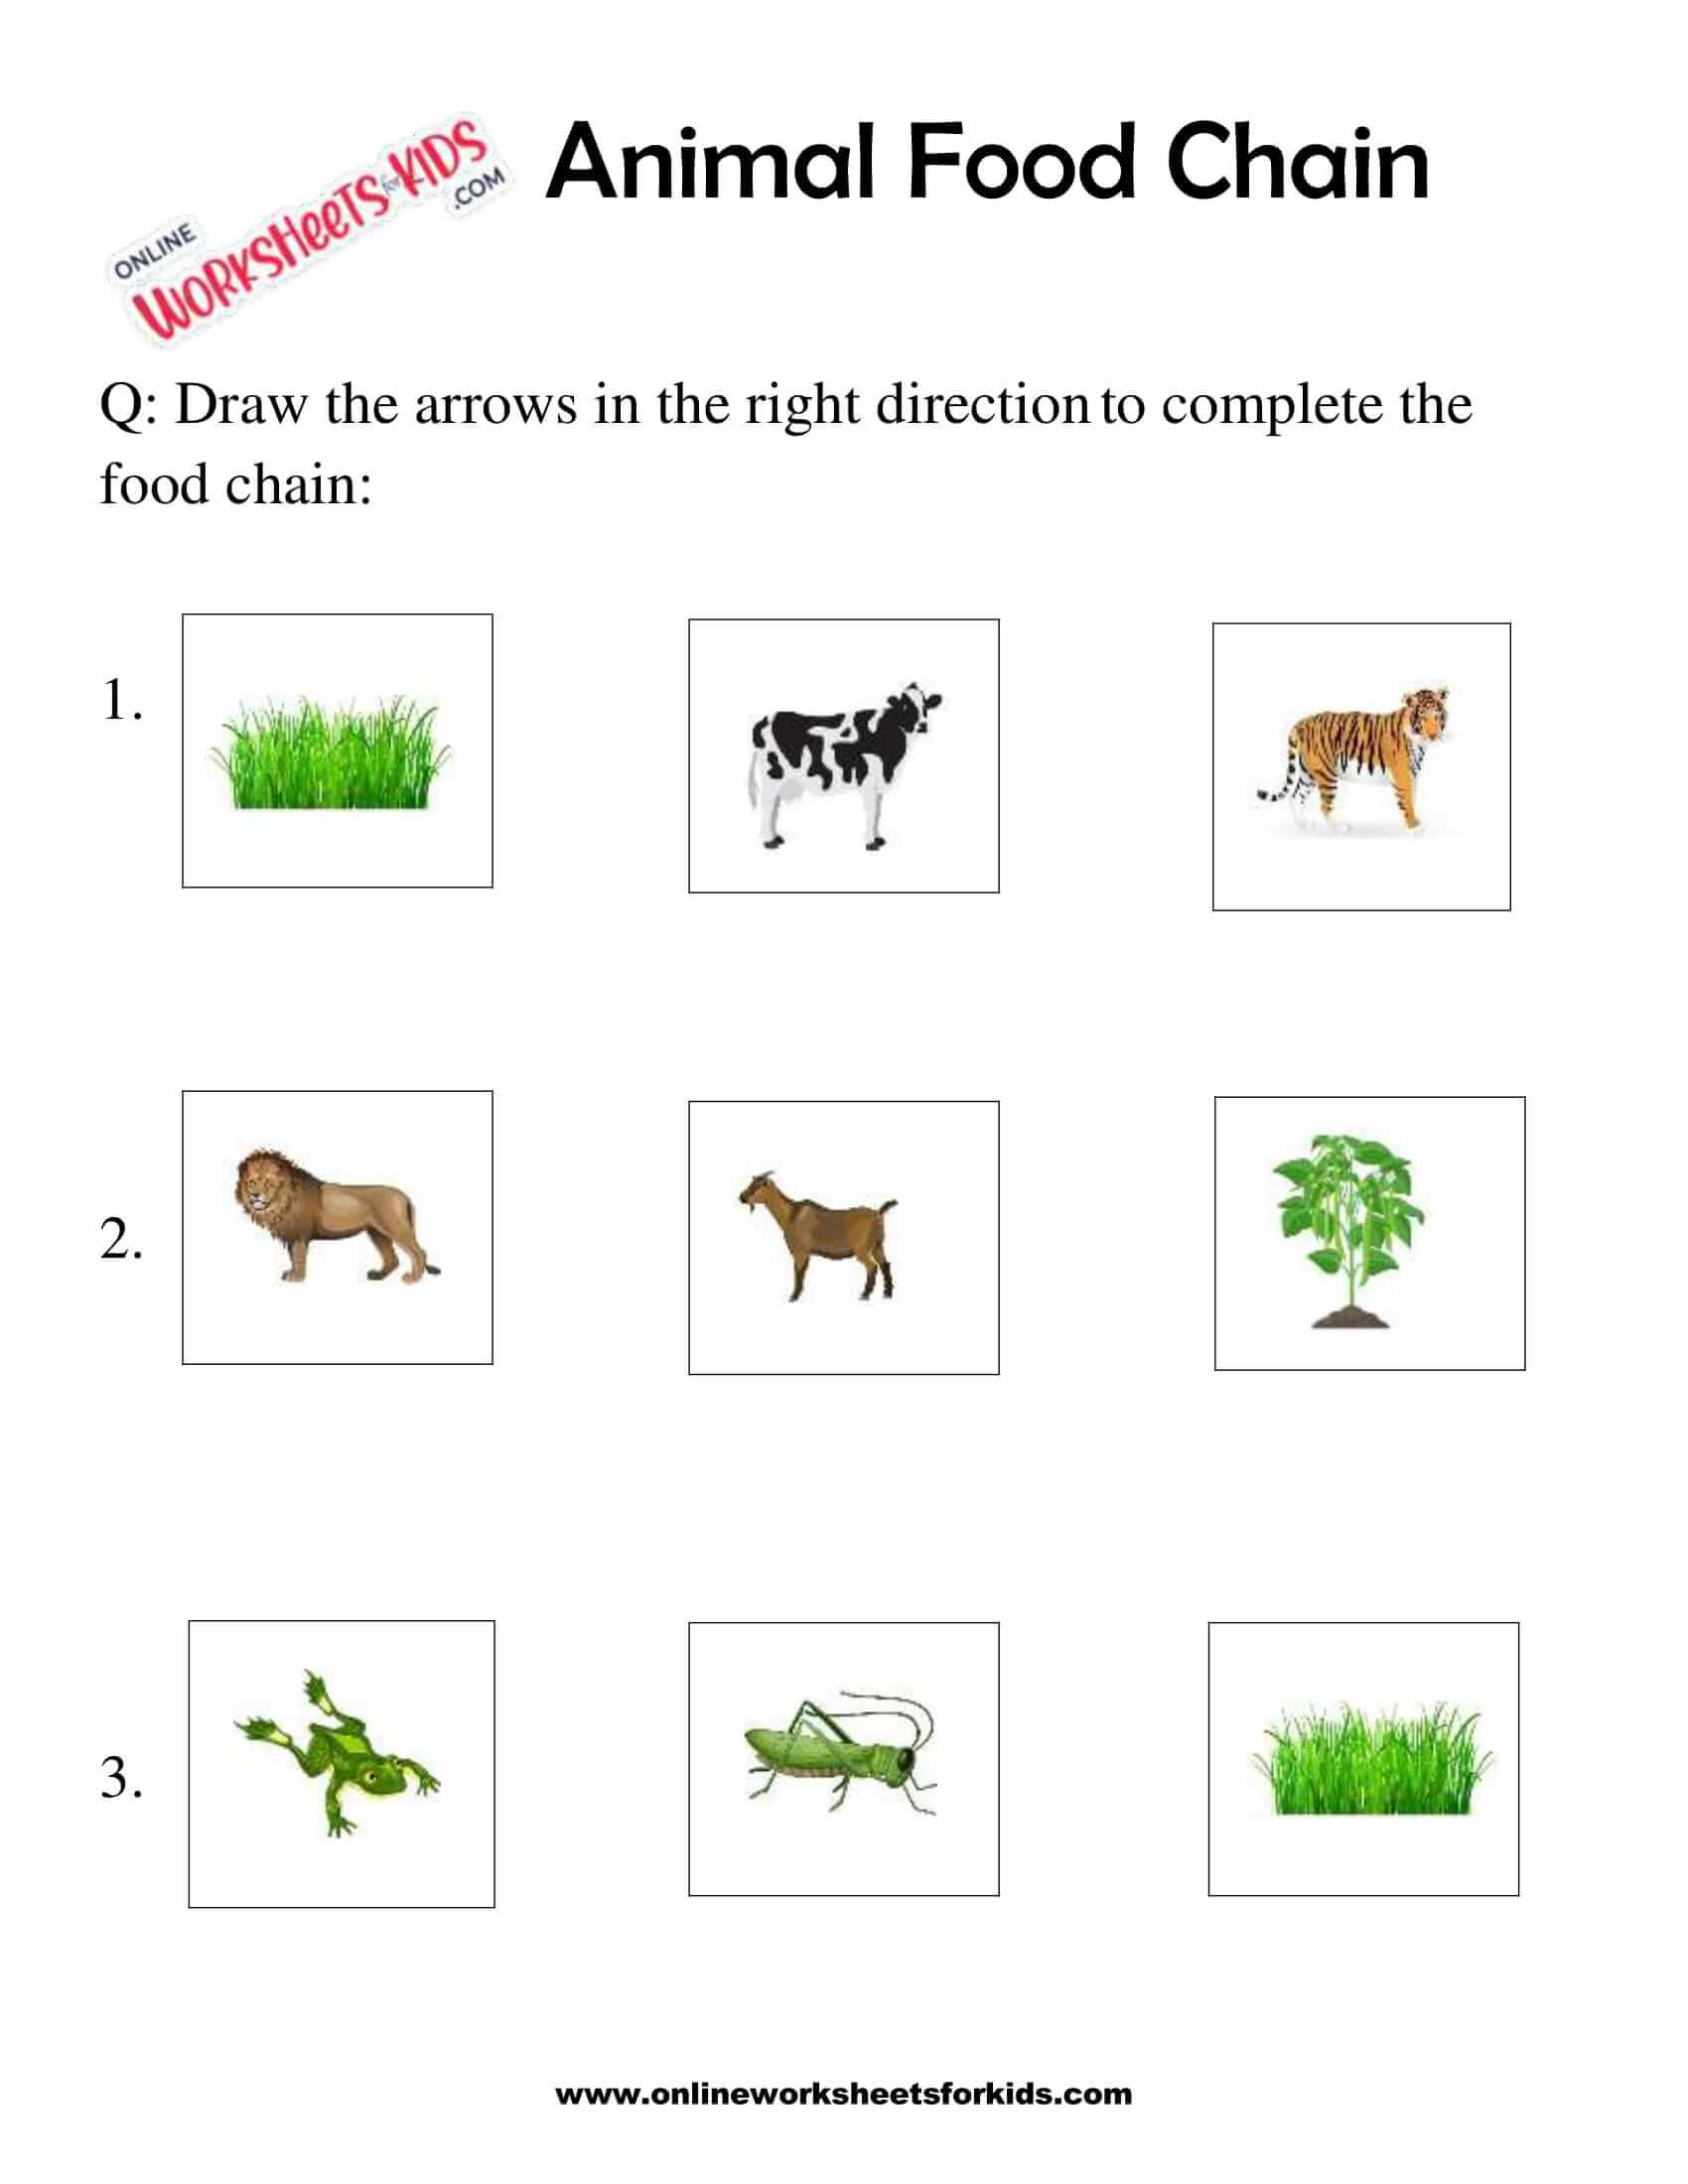 food from animals worksheet